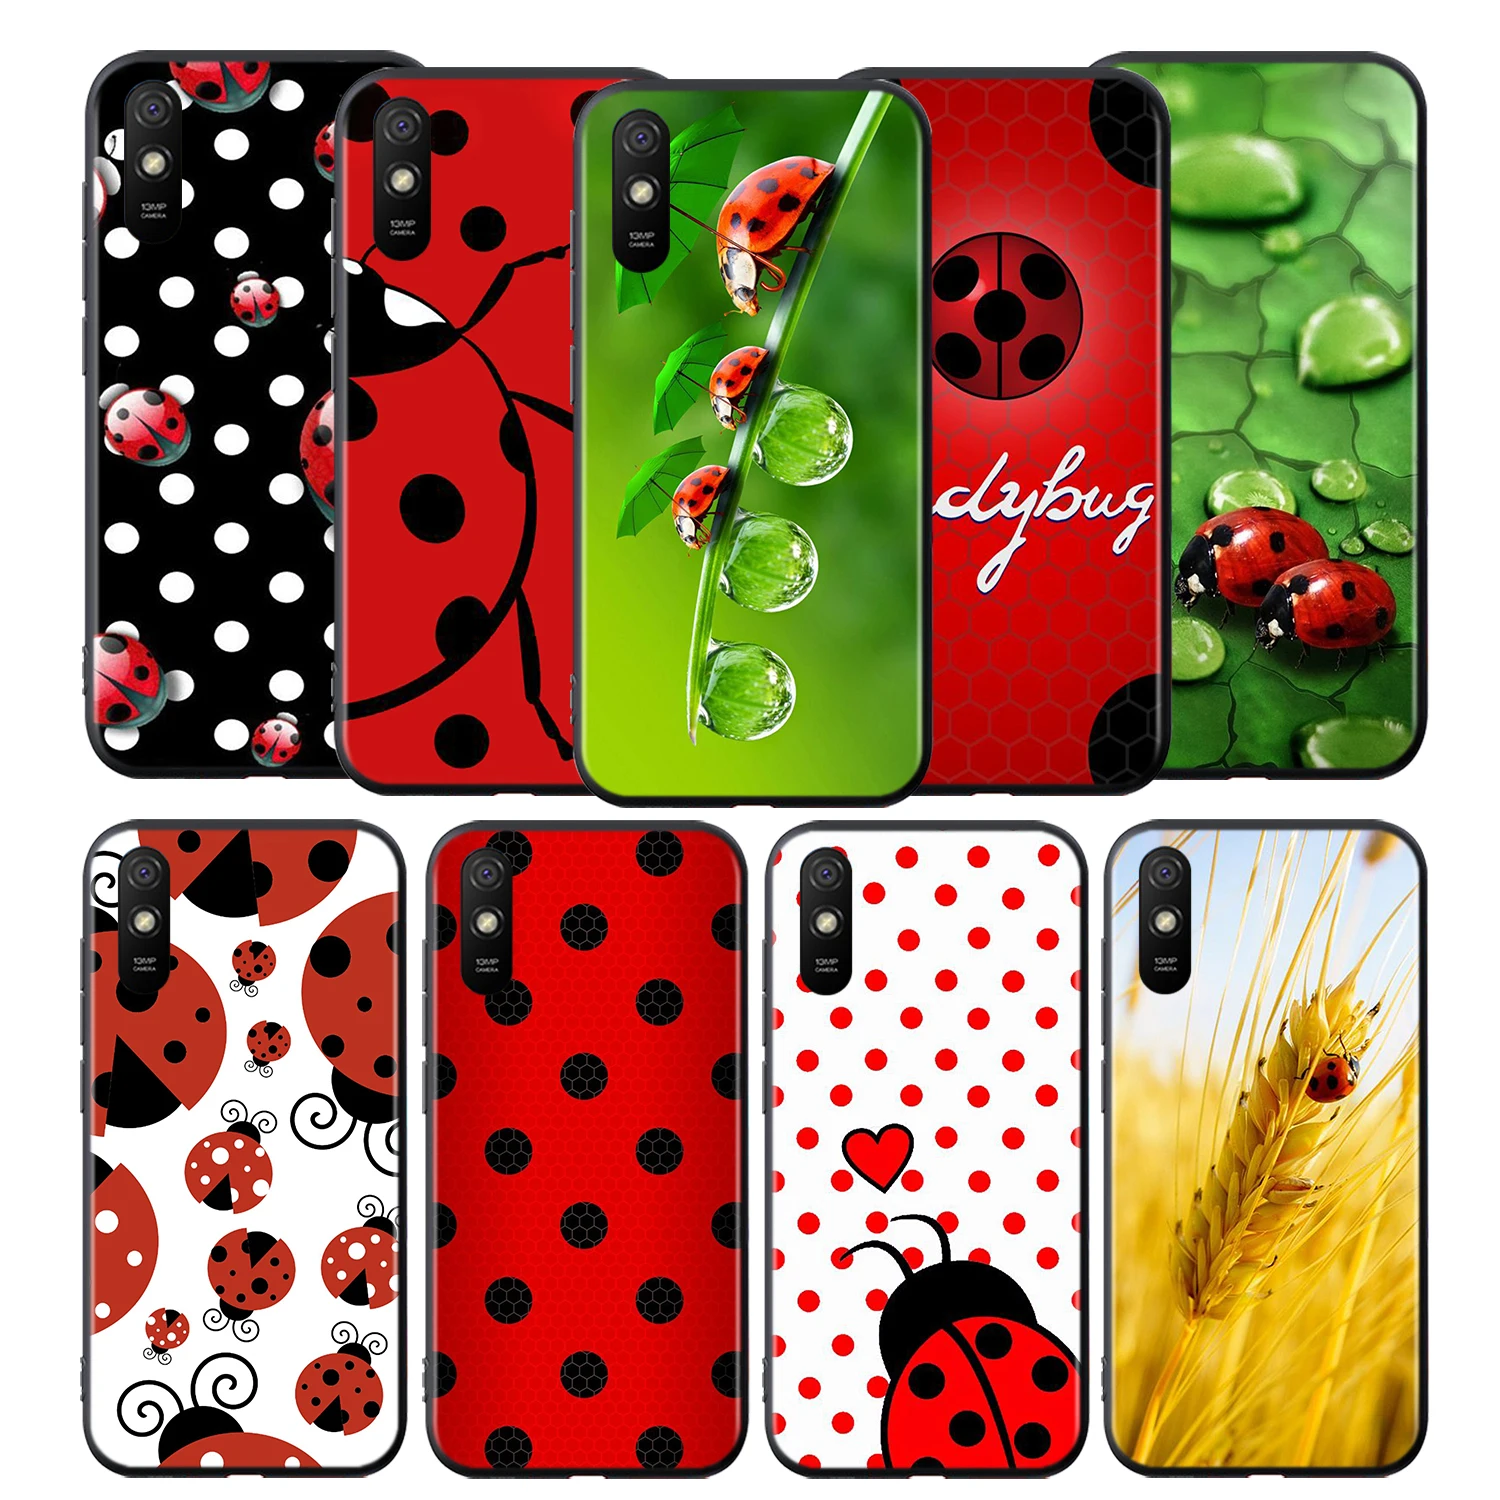 

Seven-Star Ladybug Silicone Cover For Xiaomi Redmi 9 9T 9C 8 7 6 Pro 9AT 9A 8A 7A 6A S2 5 5A 4X Plus Phone Case